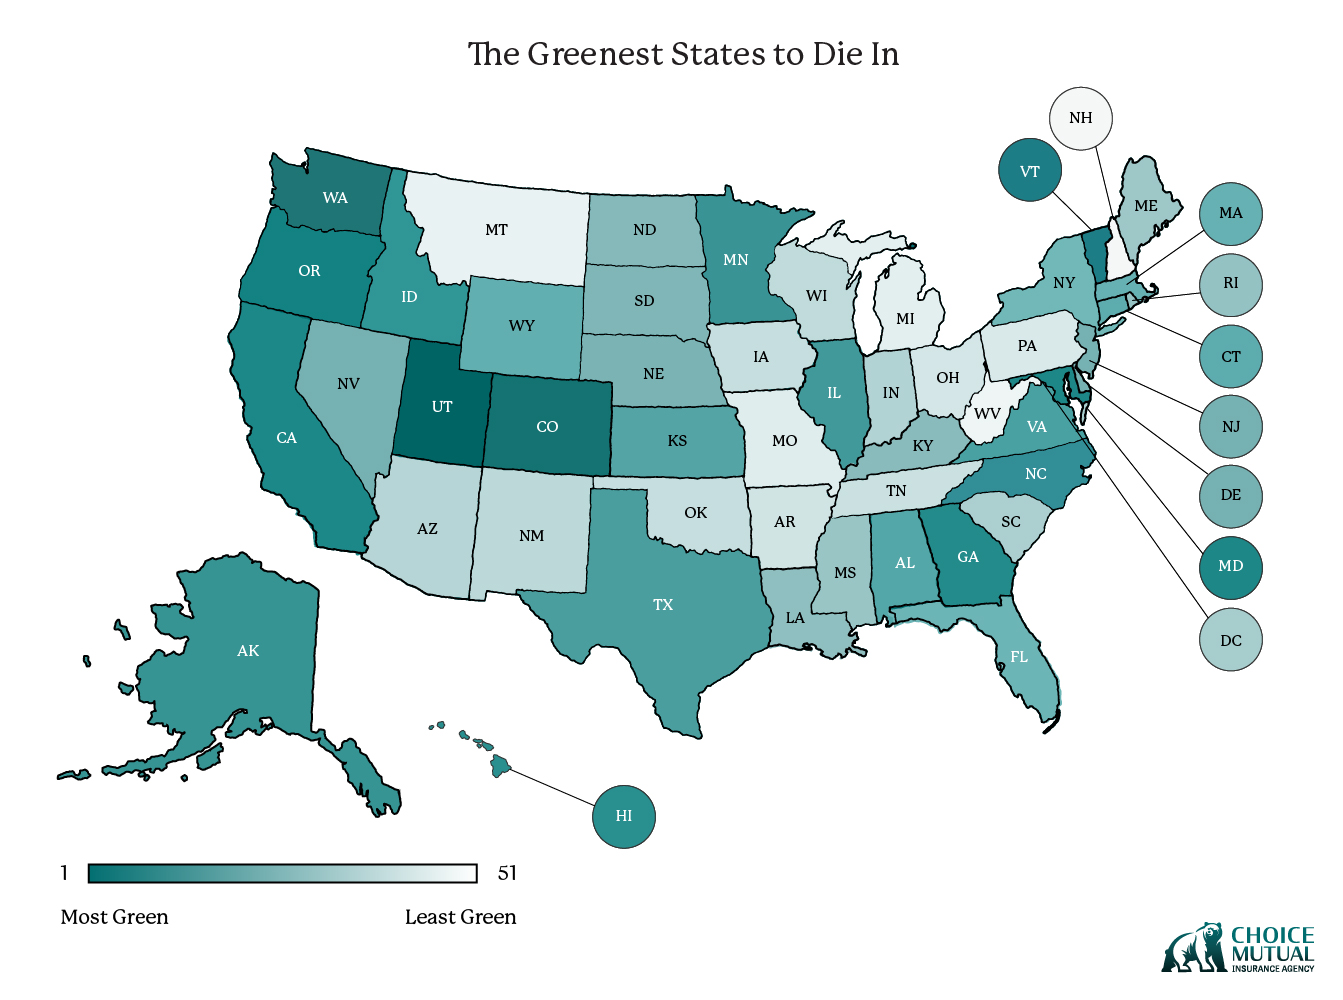 USA map ranking the greenest states to die in